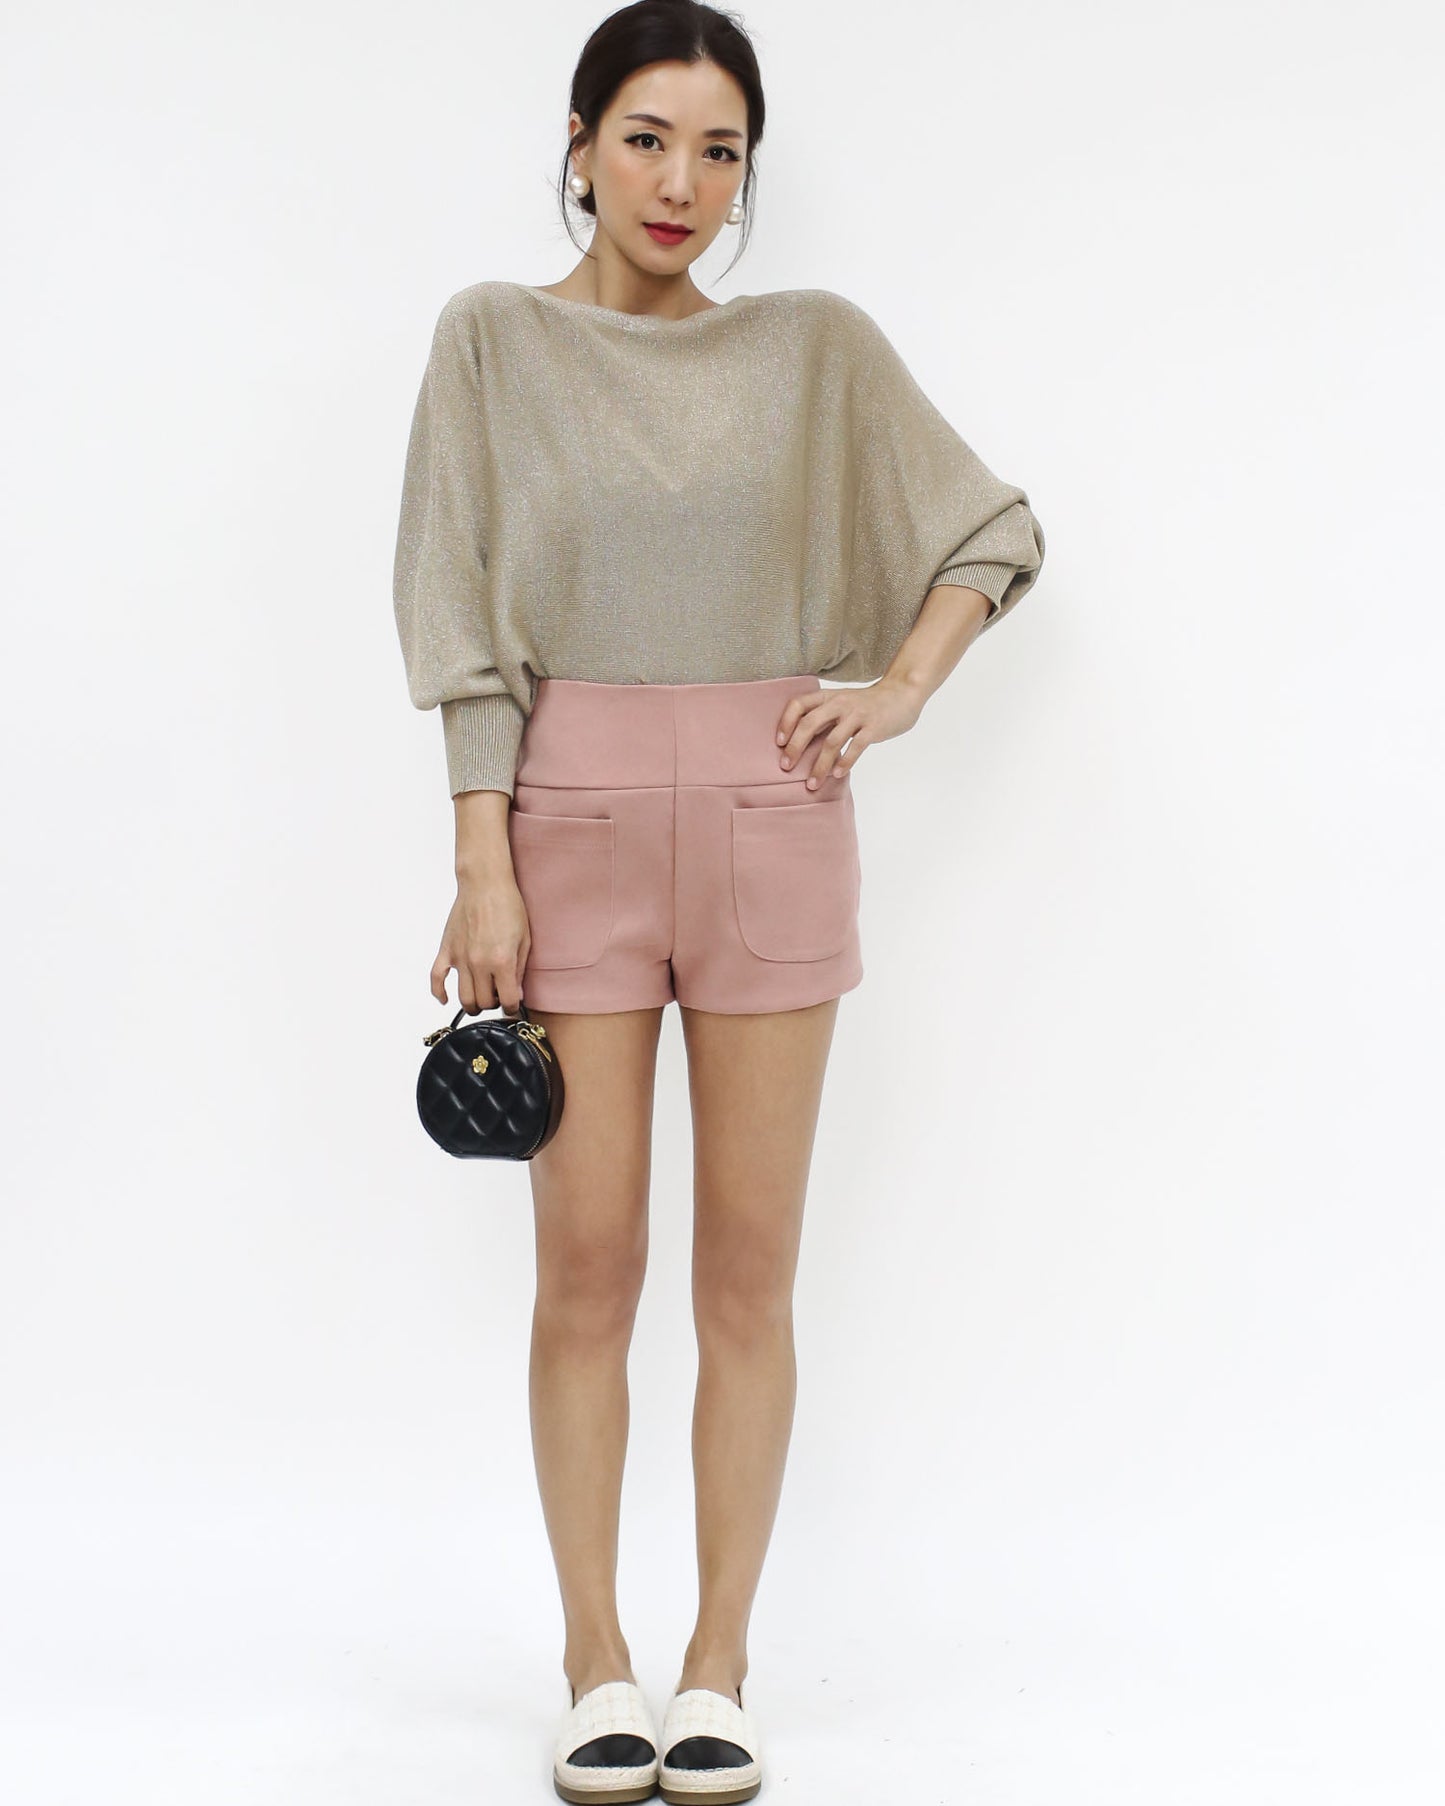 beige luxe batwing fine knitted top *pre-order*